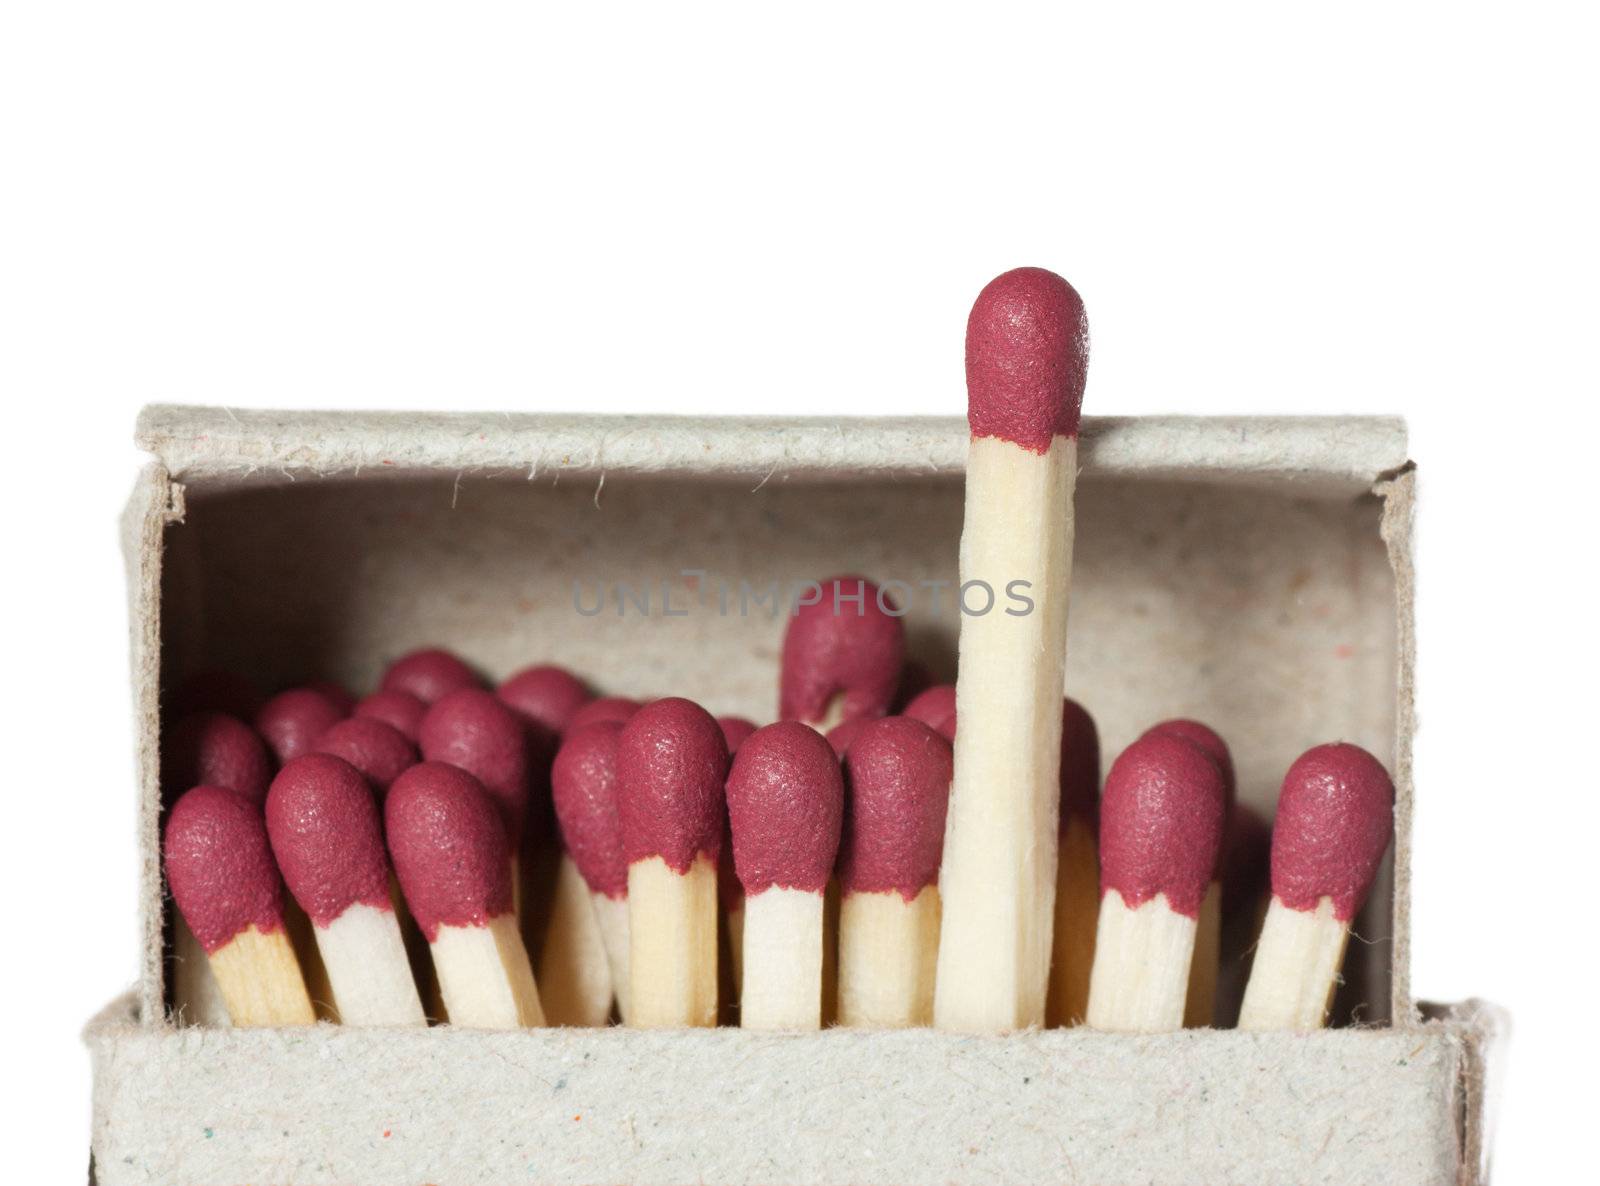 Matches in a box illustrating concept of leadership